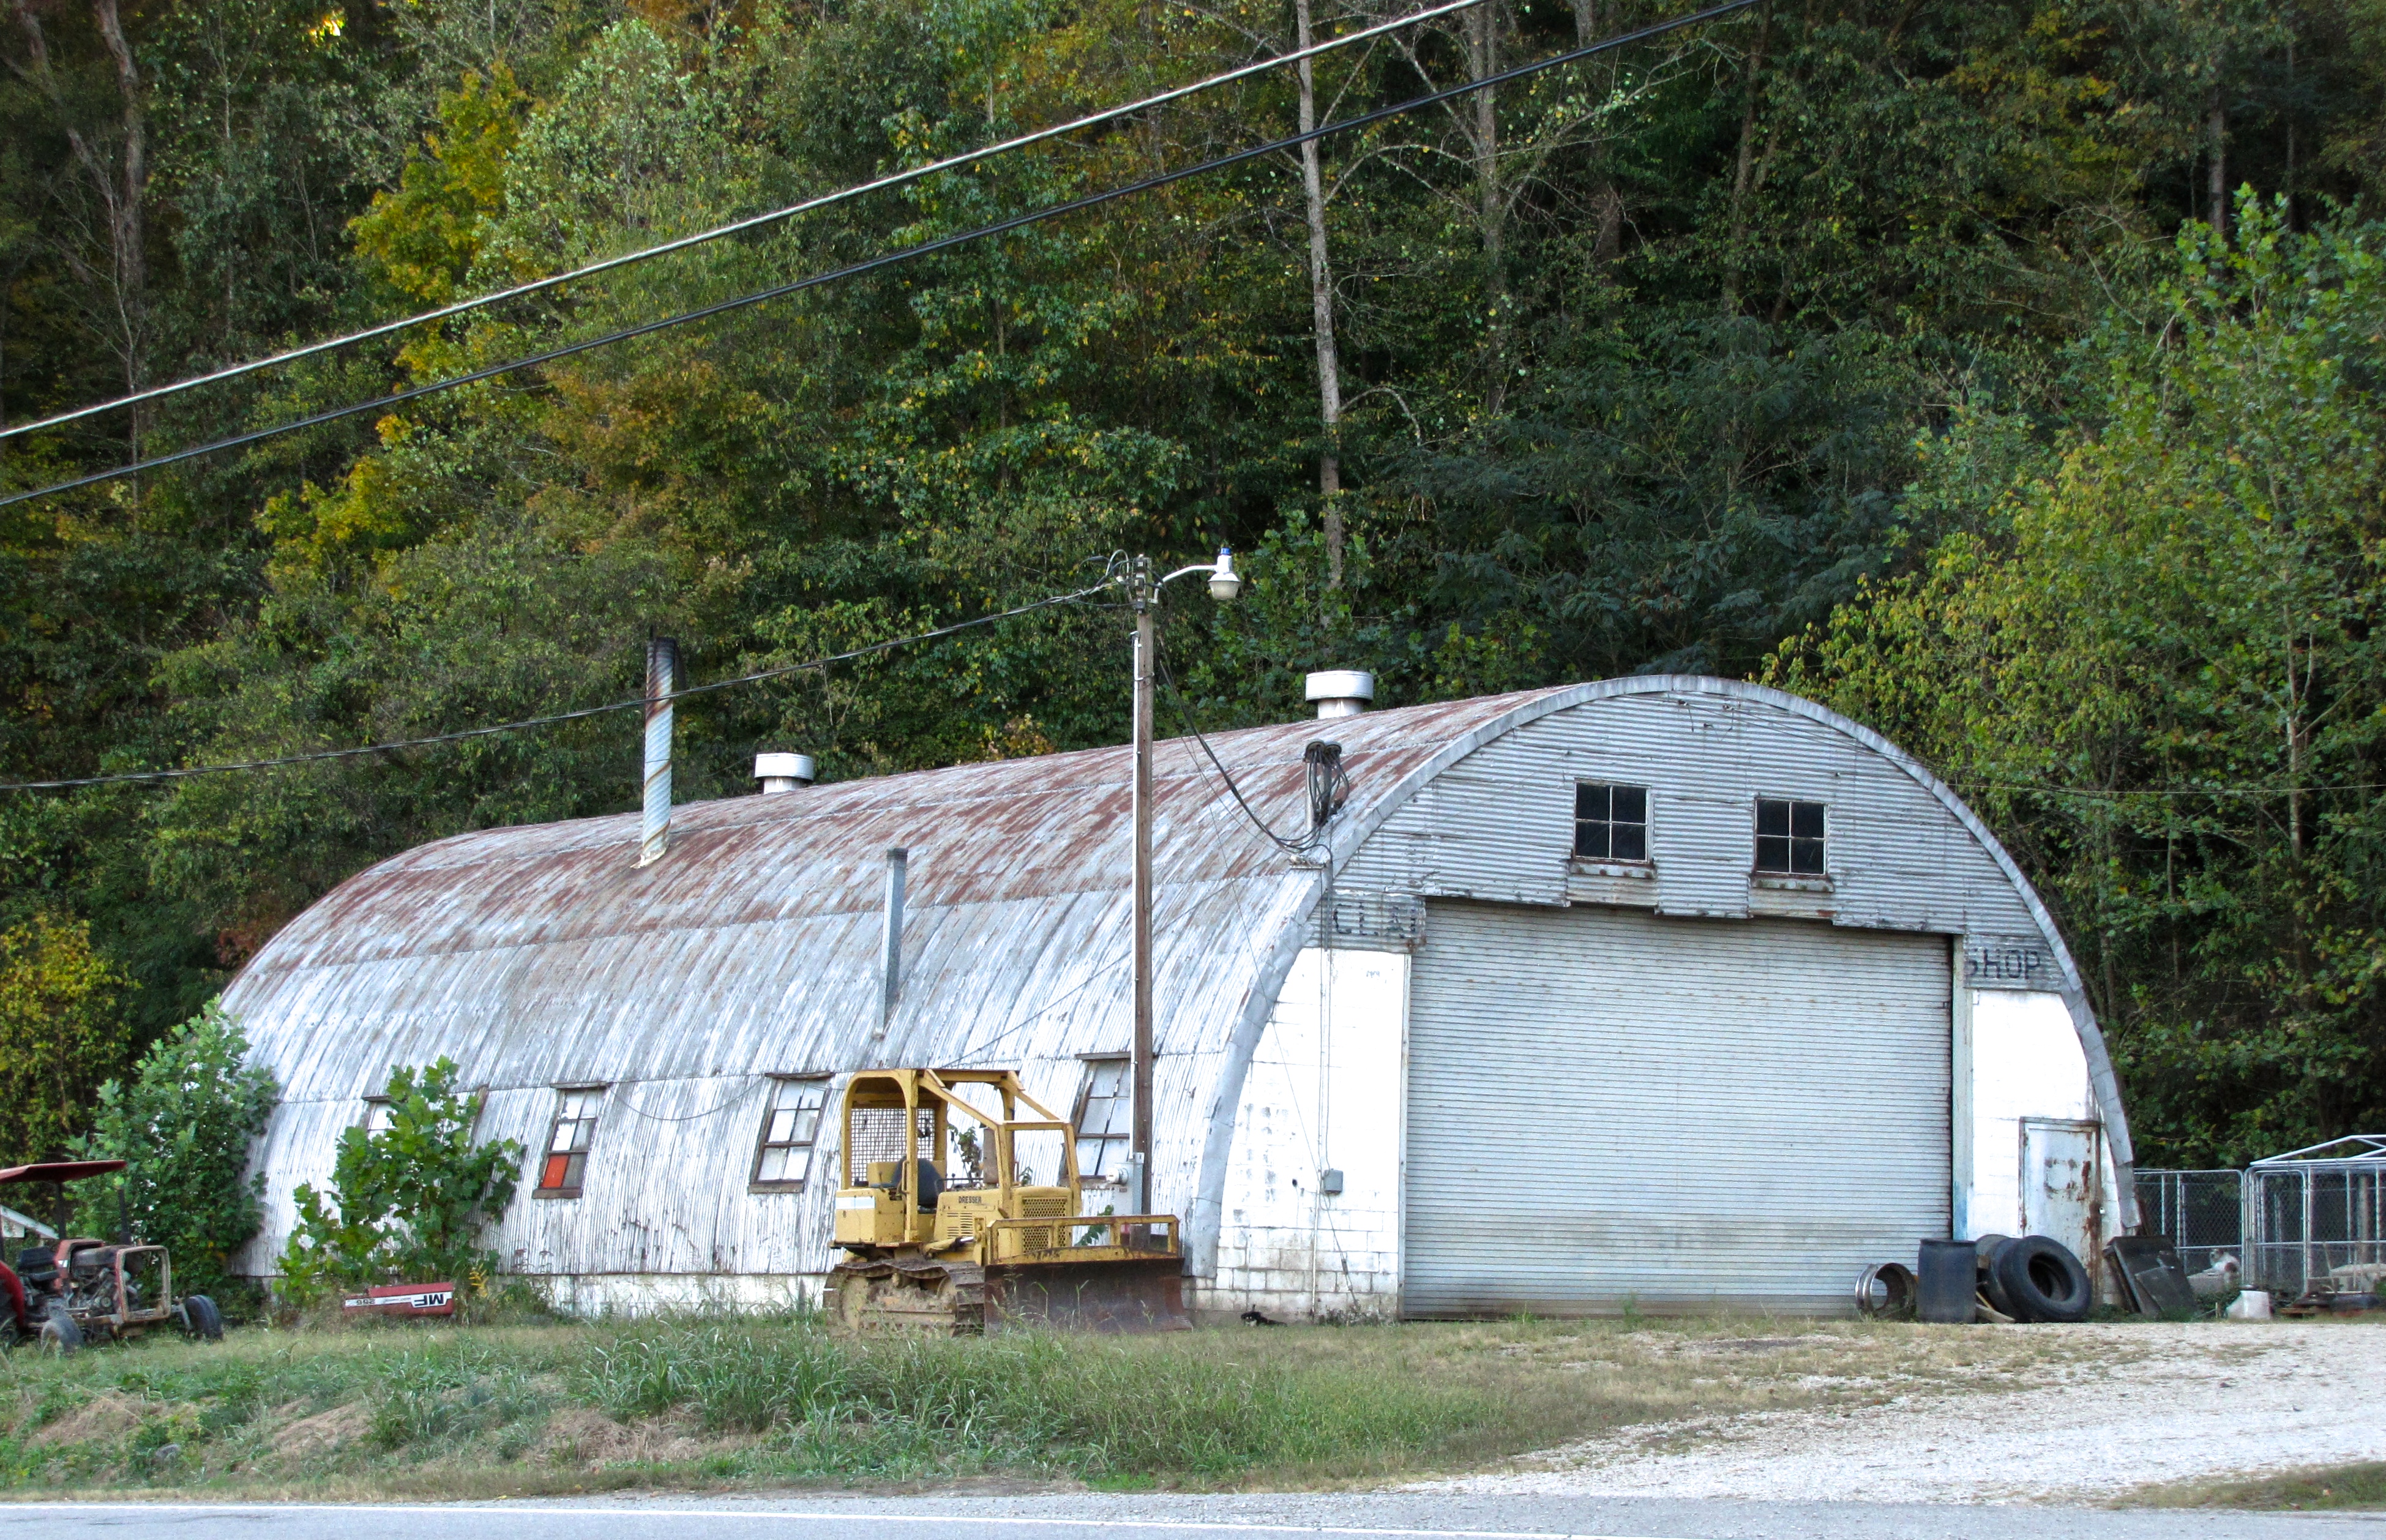 quonset hut in St. Louis, MO